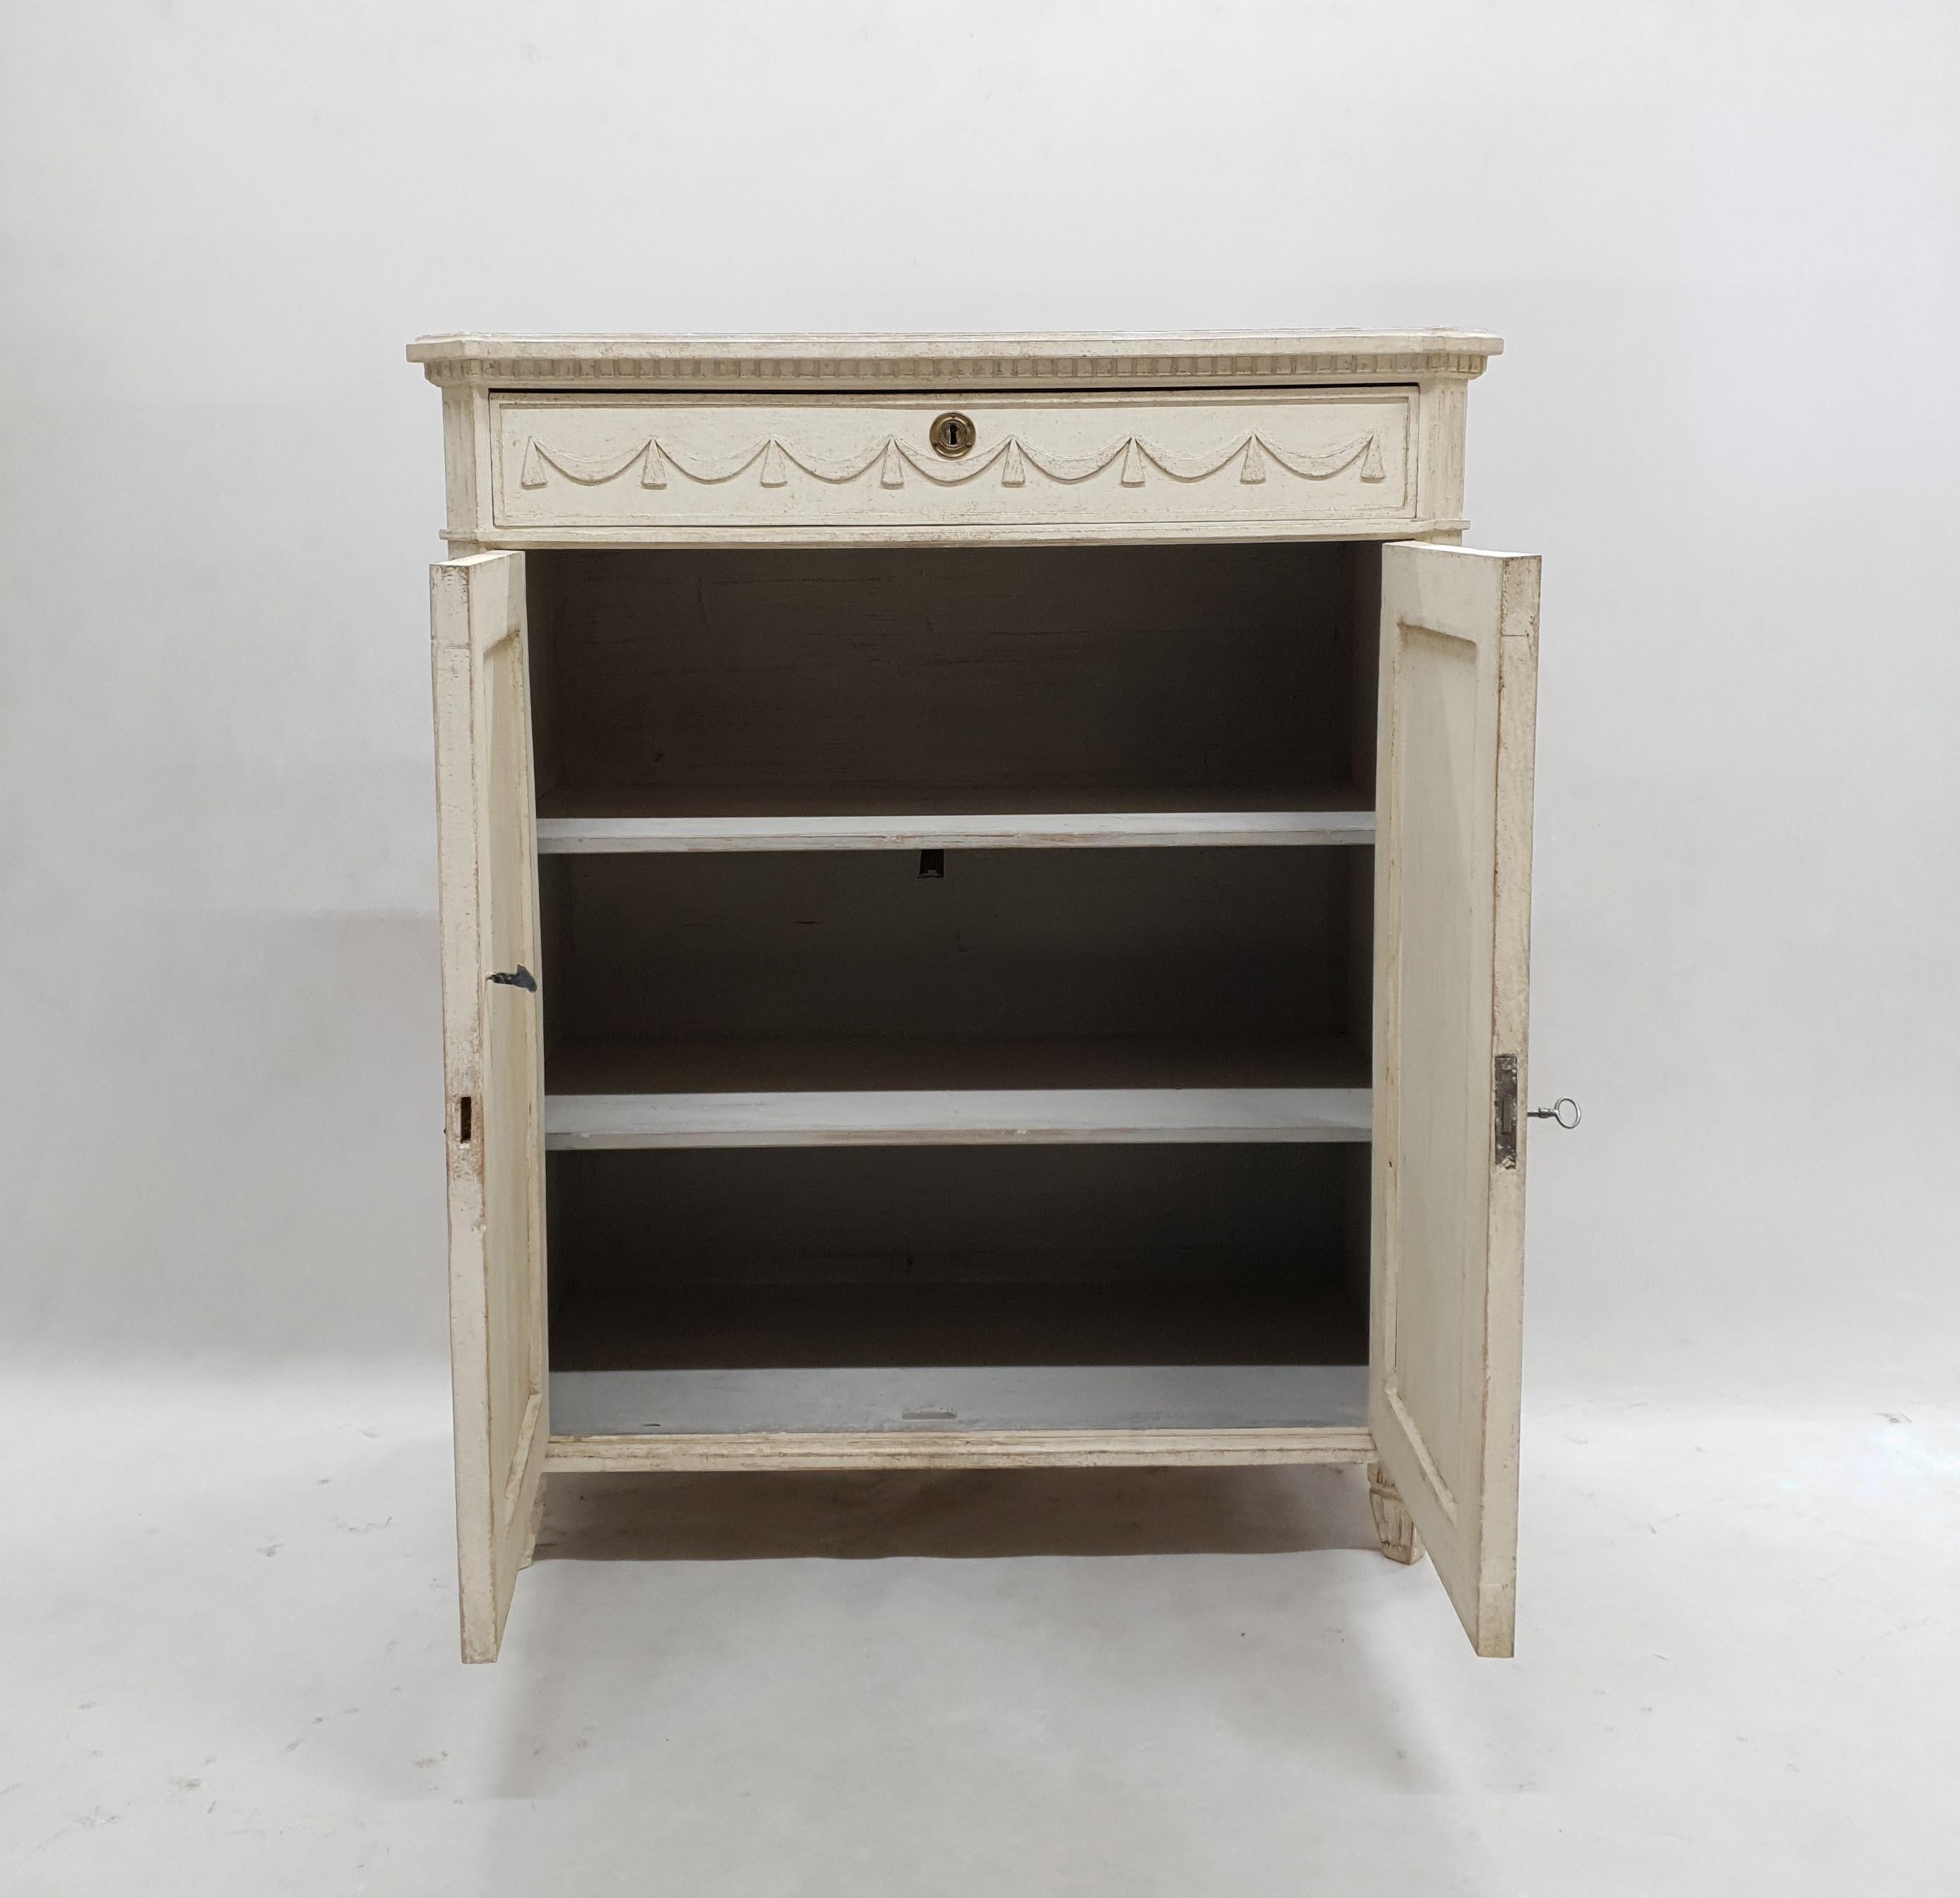 This Gustavian sideboard features one drawer and two doors. On the drawers there are delicate carving in the shape of wreaths. On the doors are vertical cutters. The exterior is in an antique white color and the interior is light grey.
 